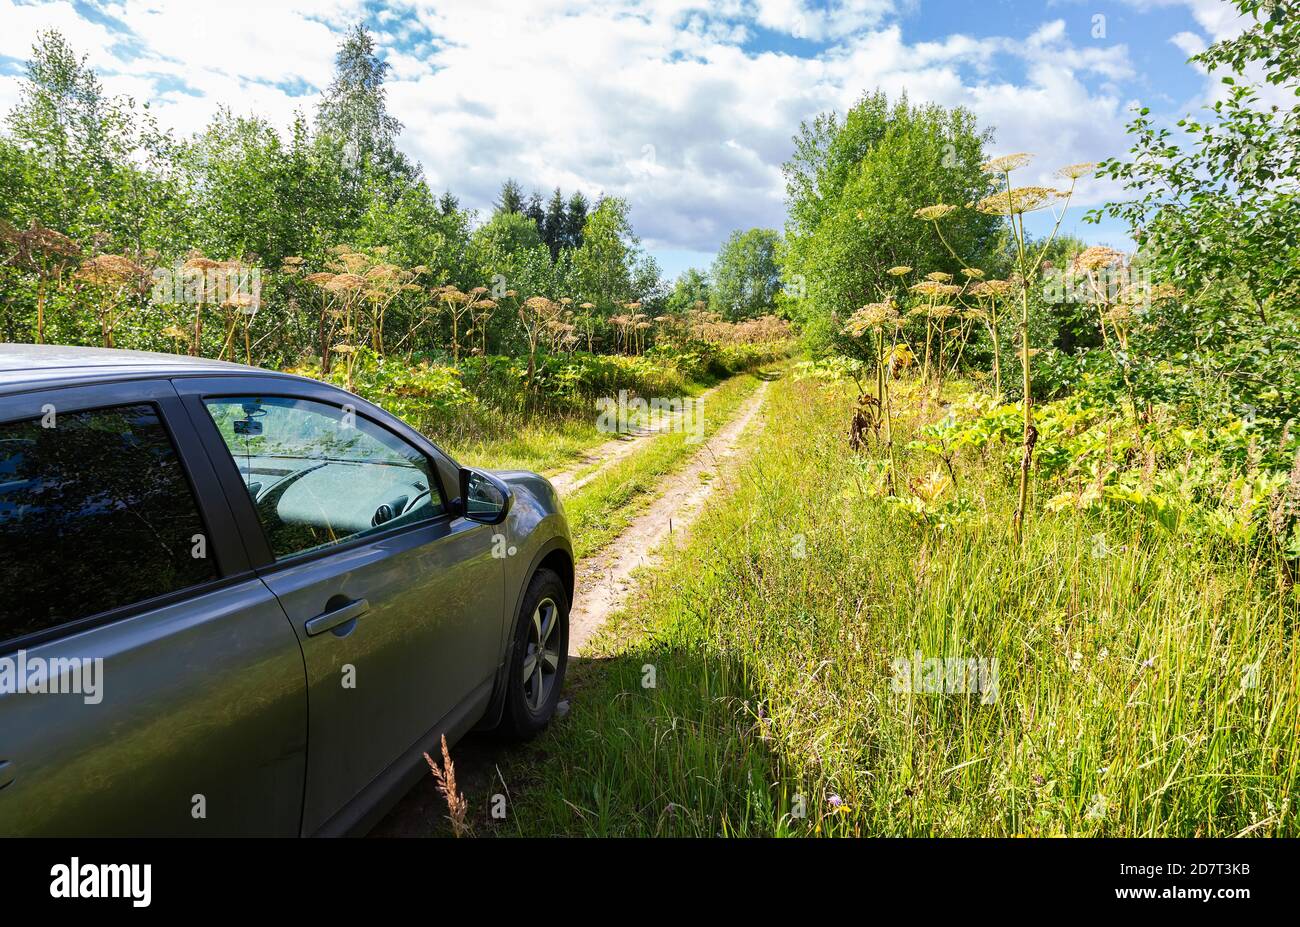 Novgorod, Russia - July 27, 2020: Nissan Qashqai vehicle on the rural road and the toxic hogweed in summer sunny day Stock Photo